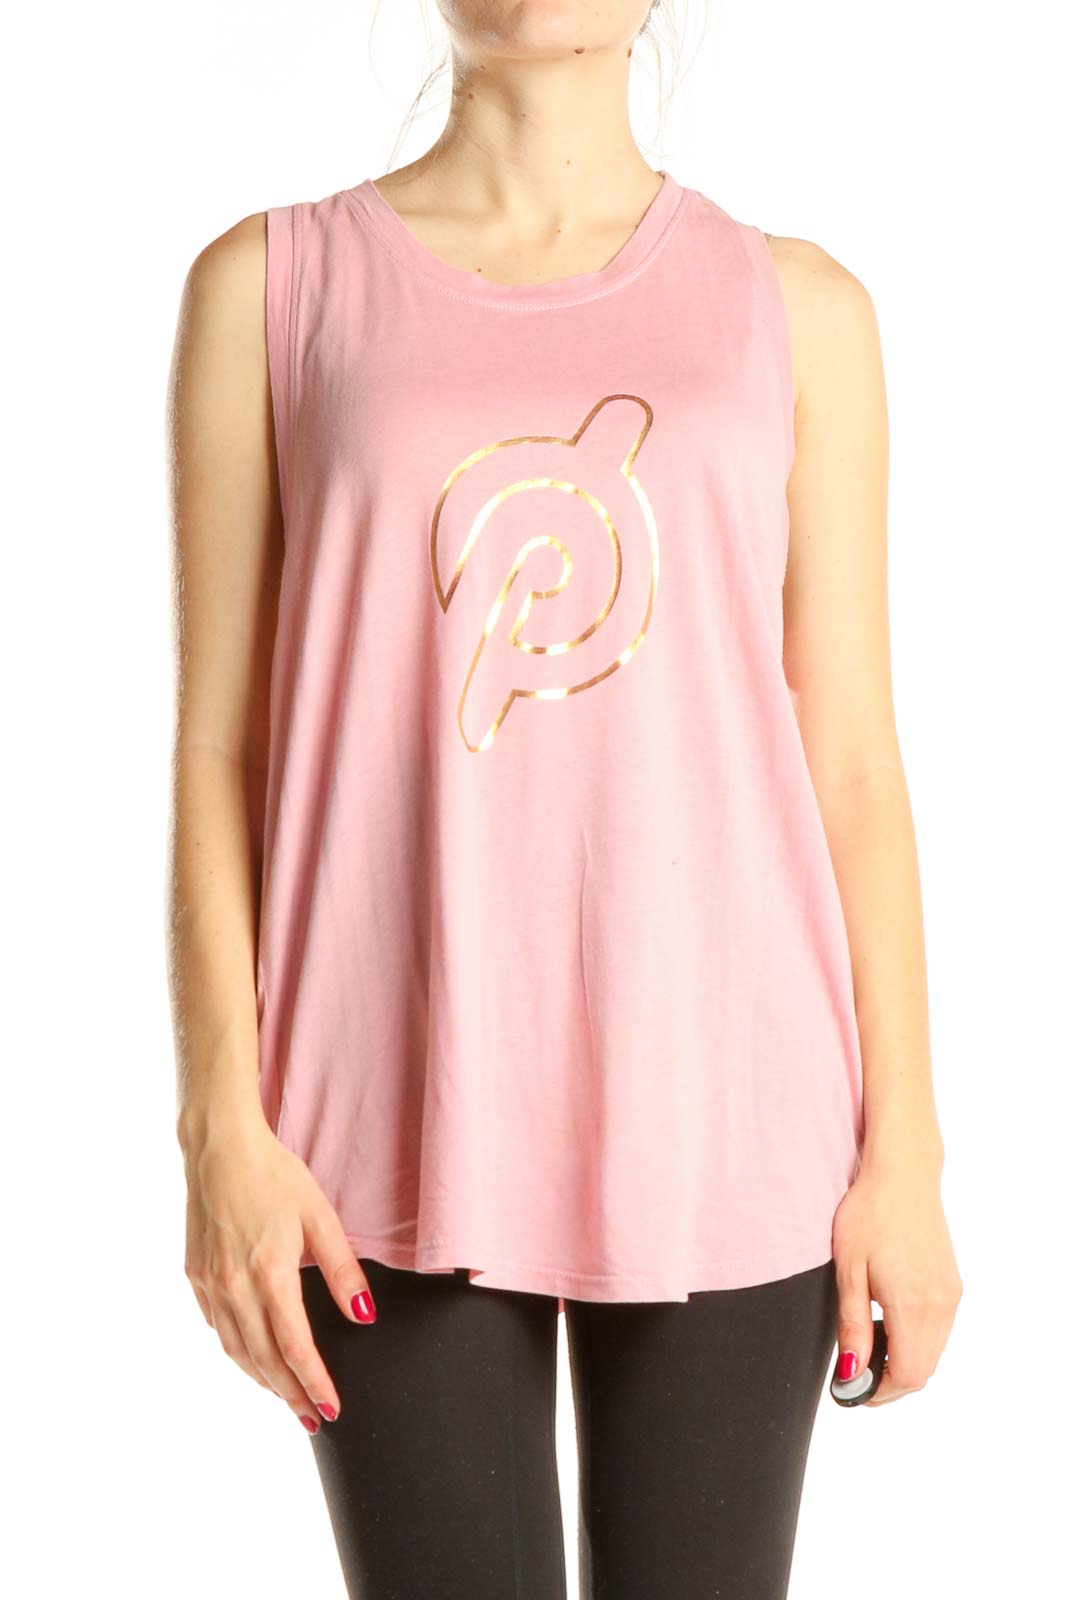 Pink Graphic Print Activewear Tank Top Front